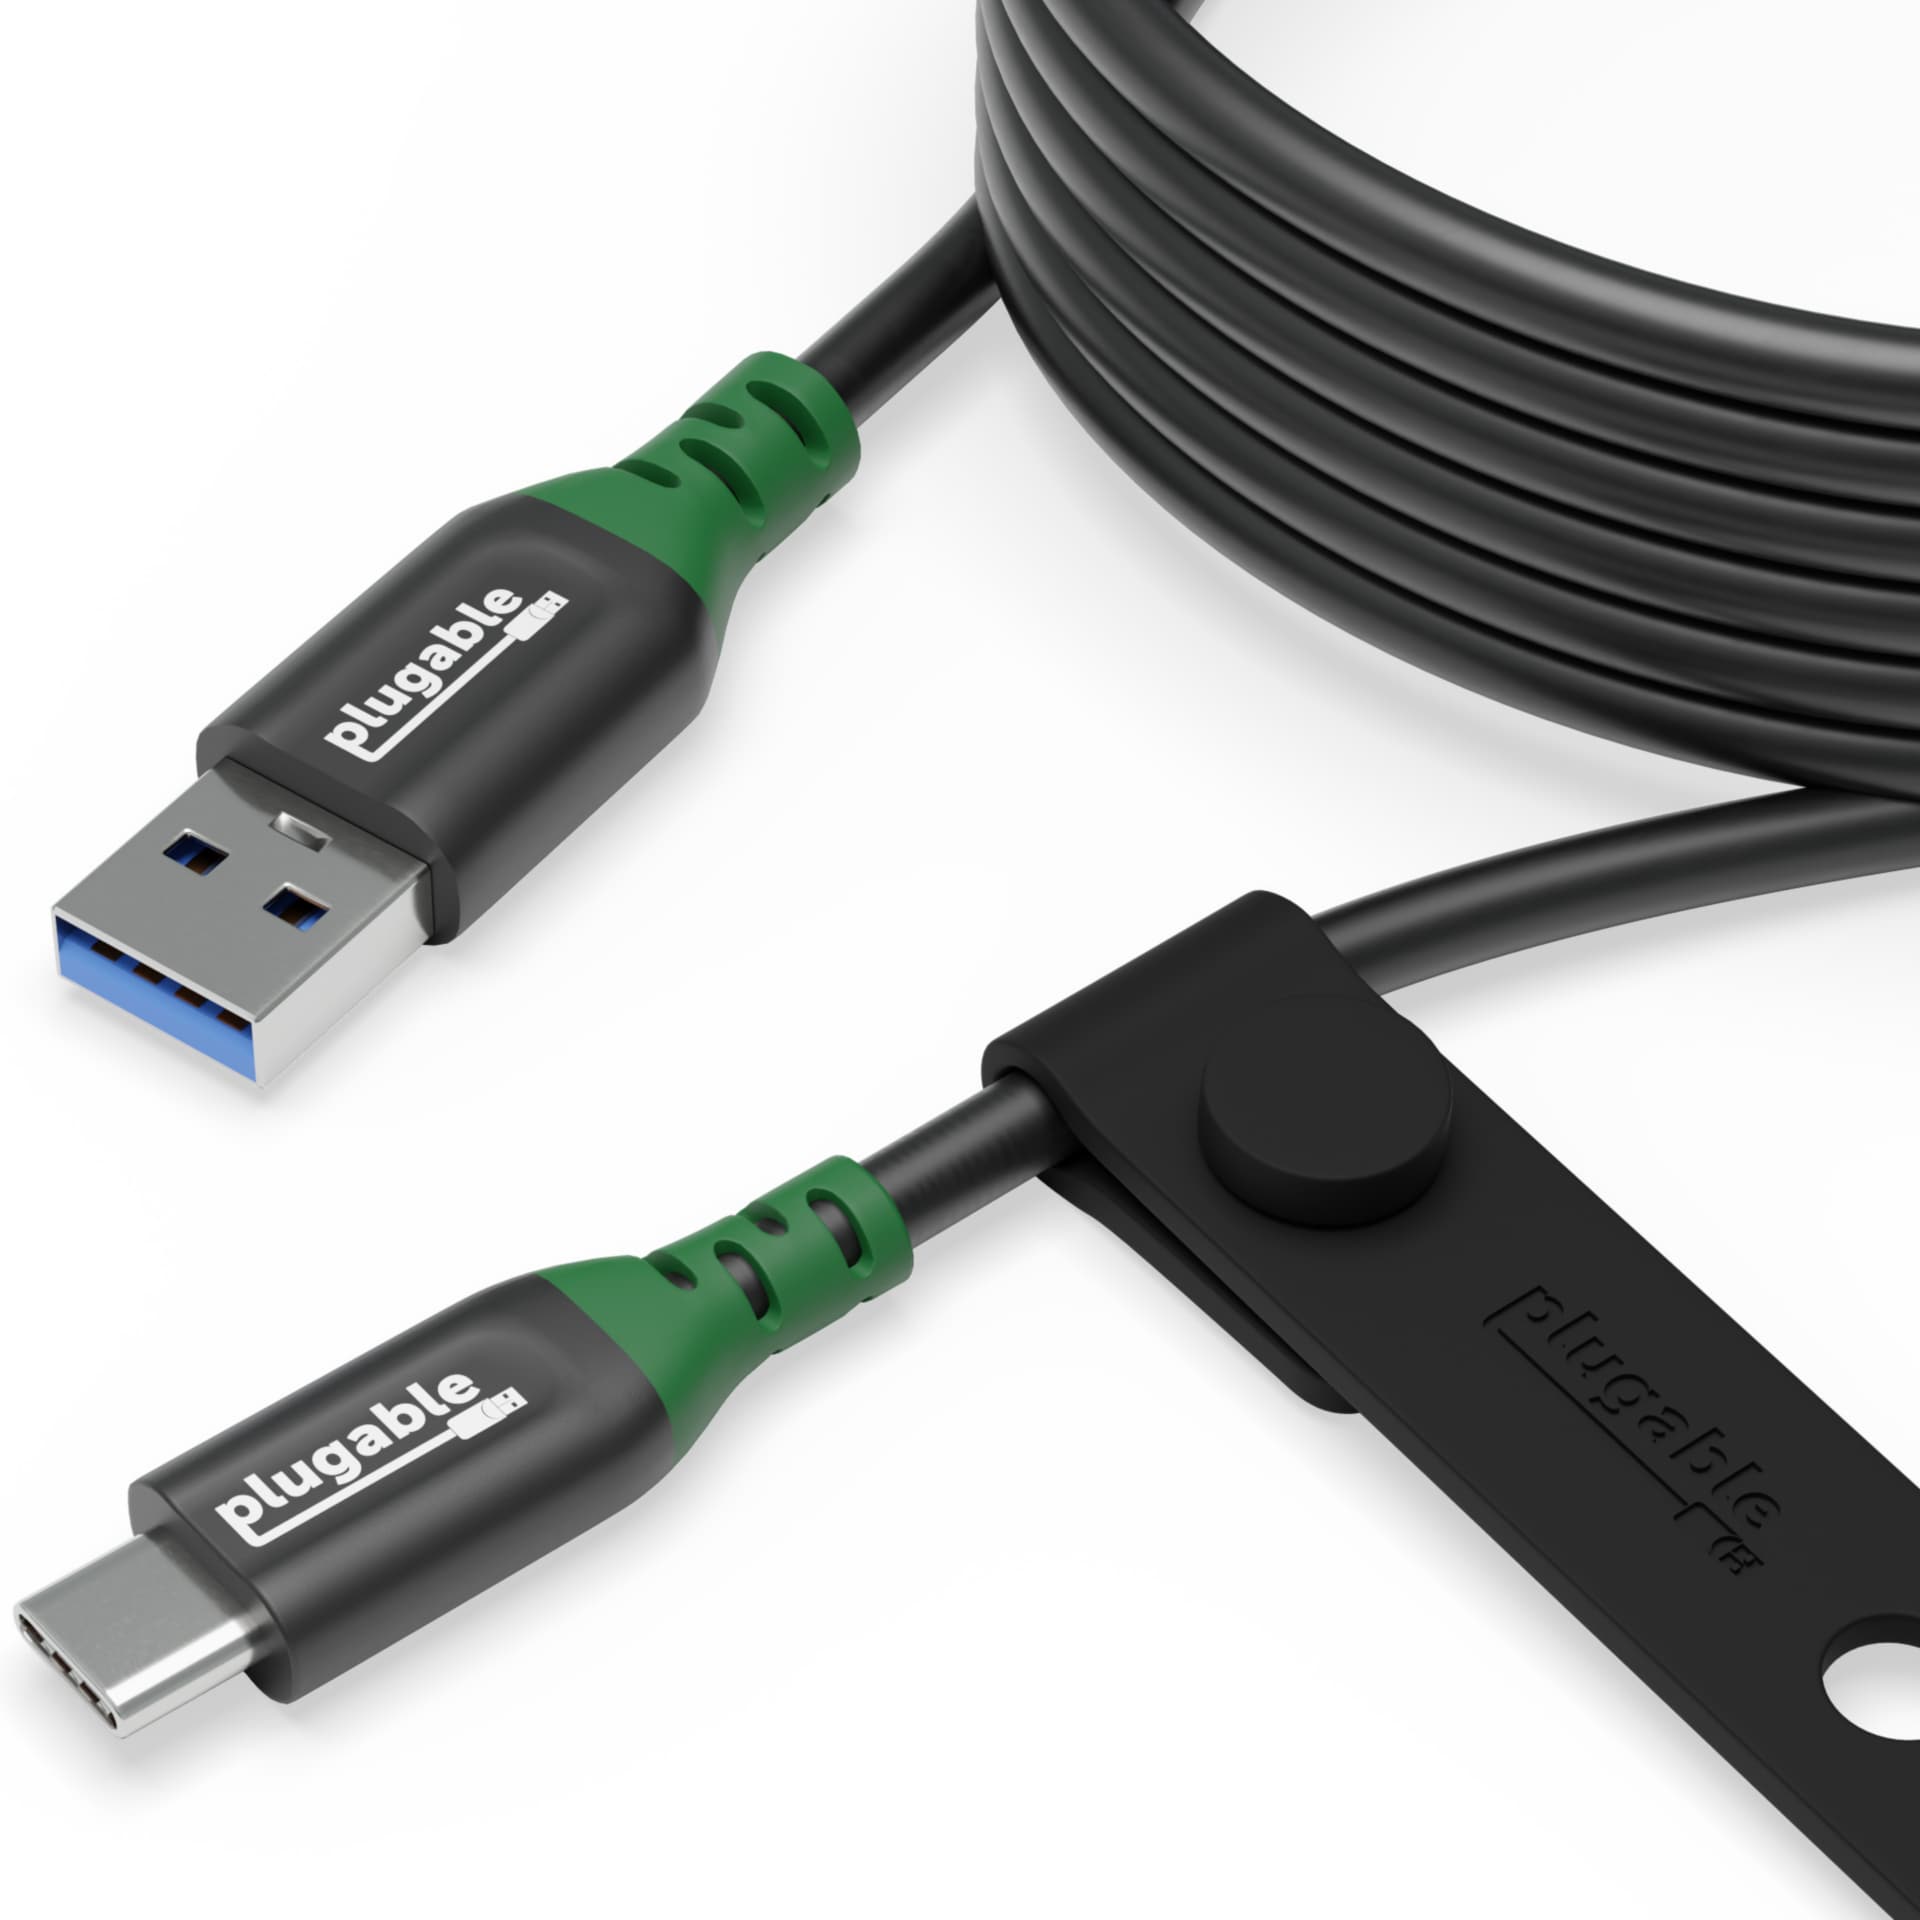 Plugable USB C to USB A Cable, USB 32 Gen 2 USB Cables, 3A (15W) Charging USB C Data Cable 5Gbps - 6ft (2M)